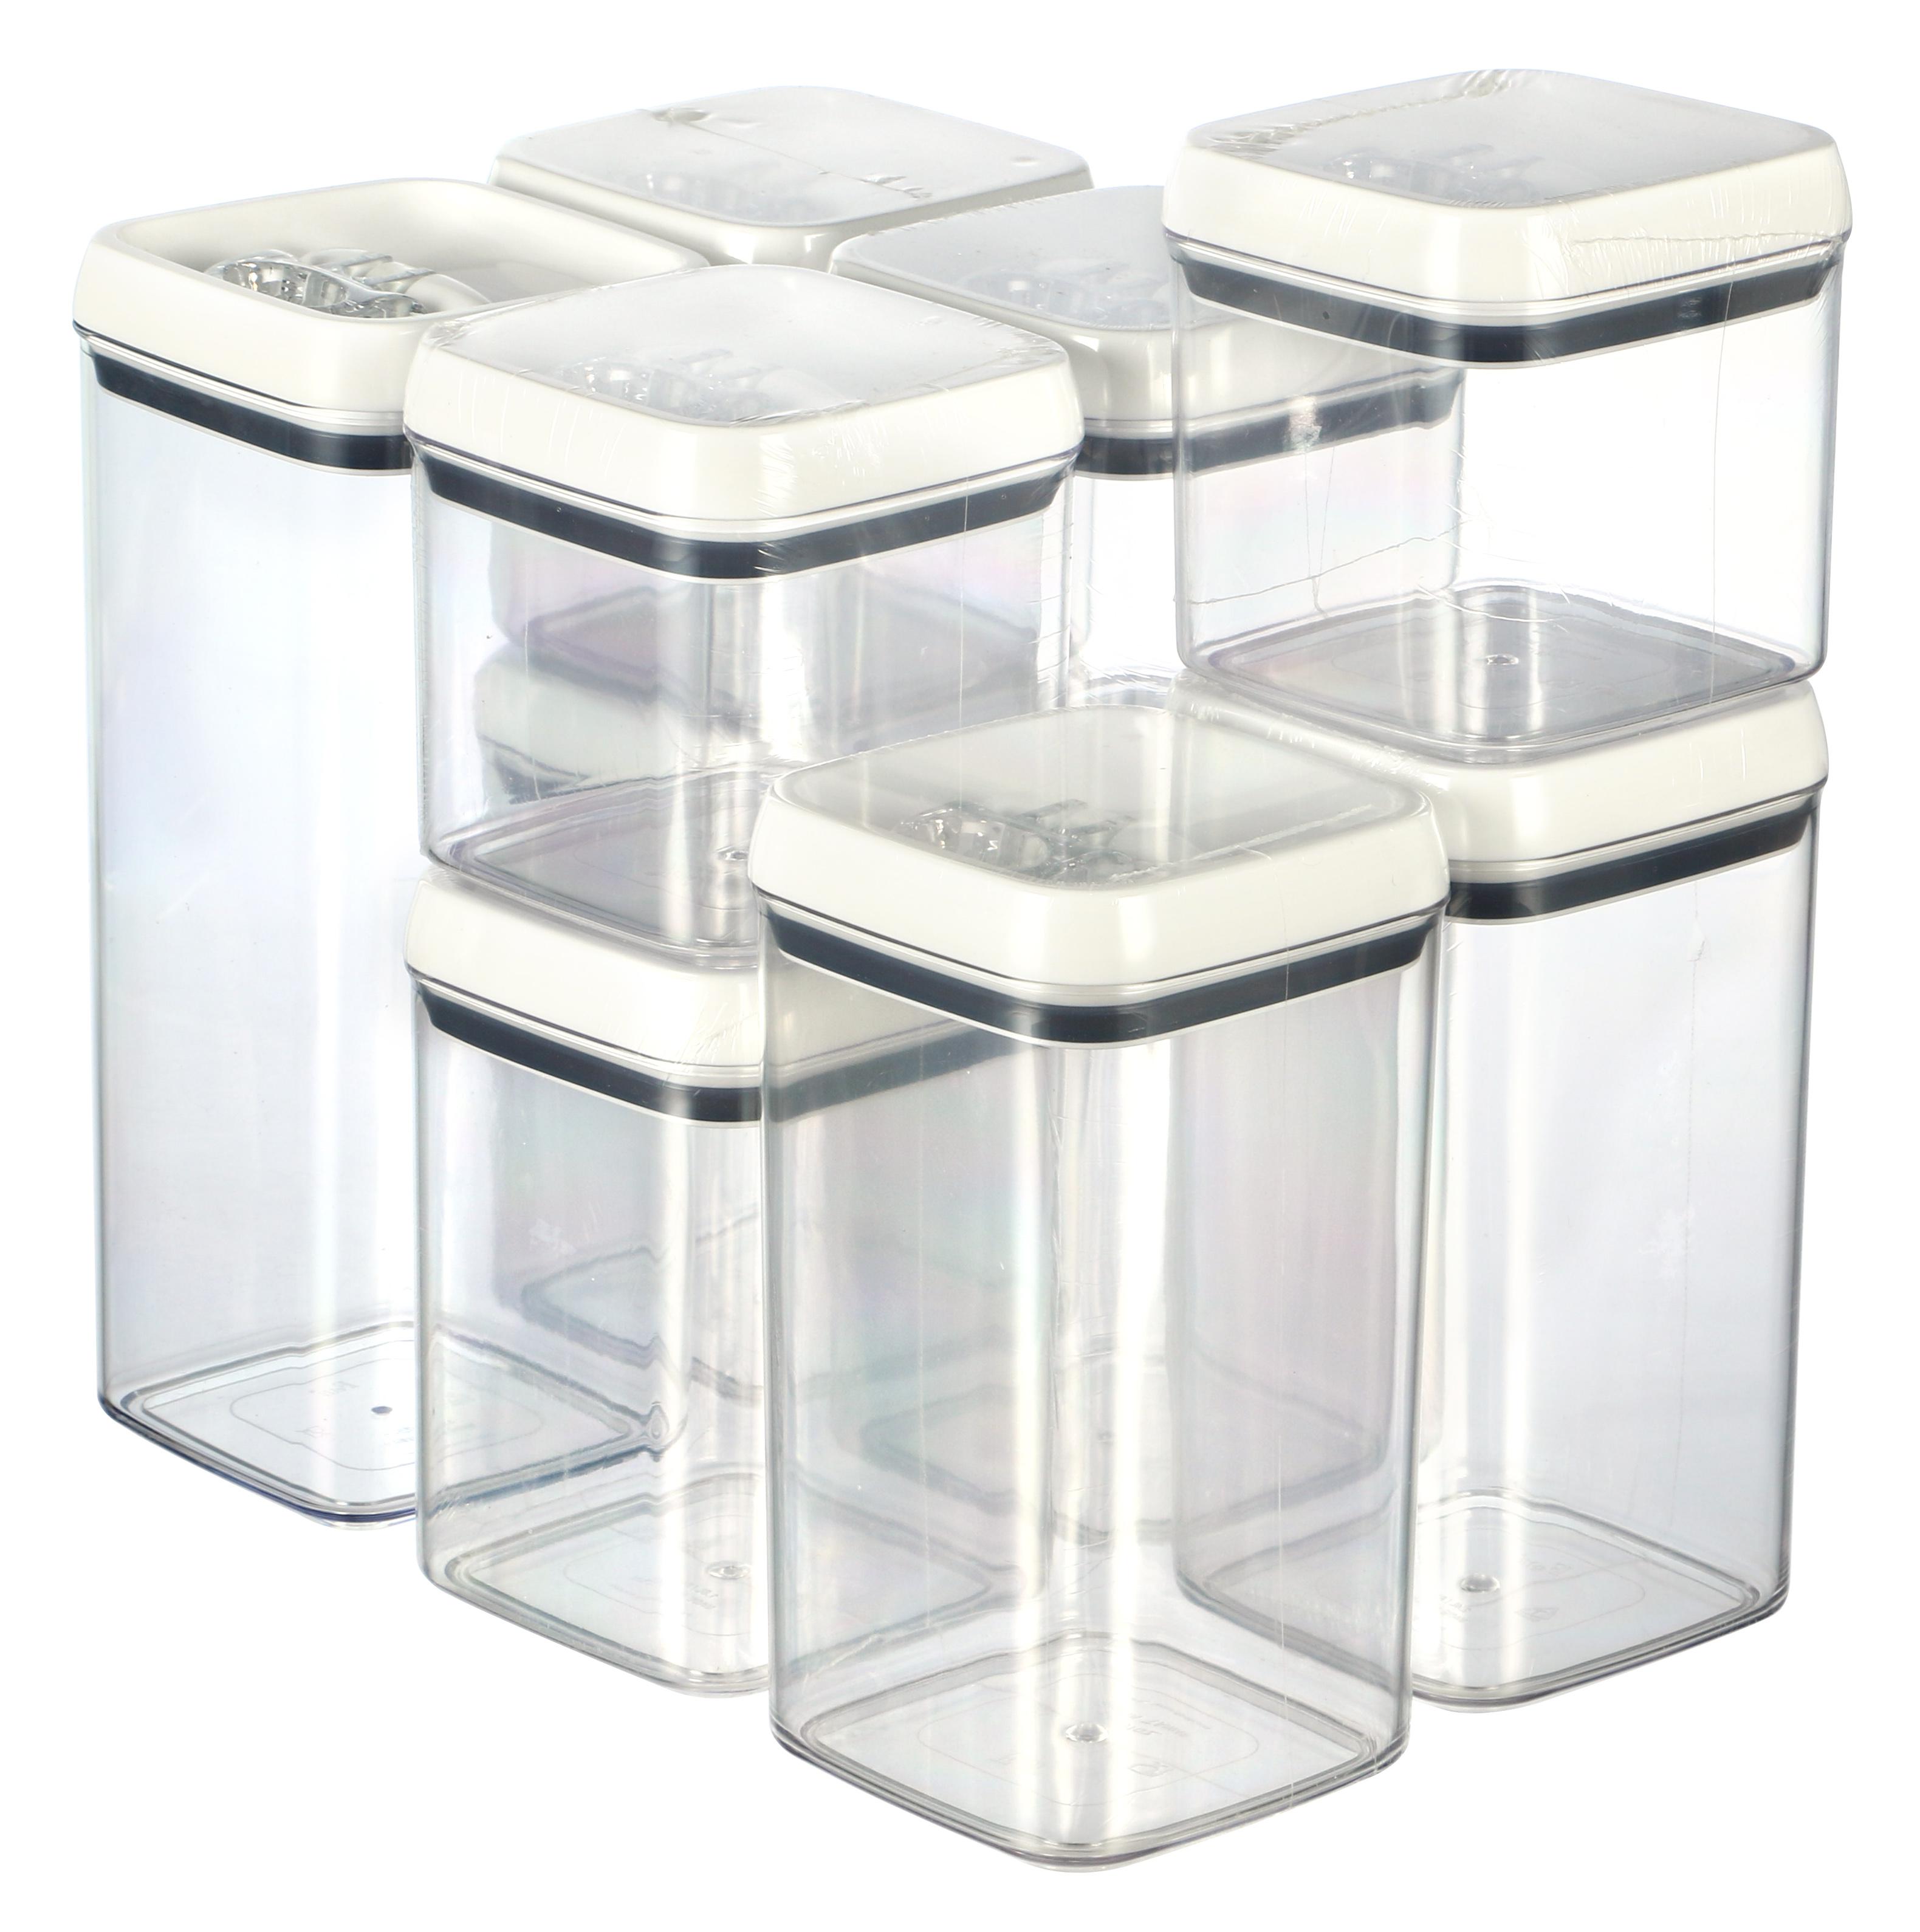 Better Homes & Gardens Canister Pack of 10 - Flip-Tite Food Storage Container Set with Scoop and Labels - image 1 of 6